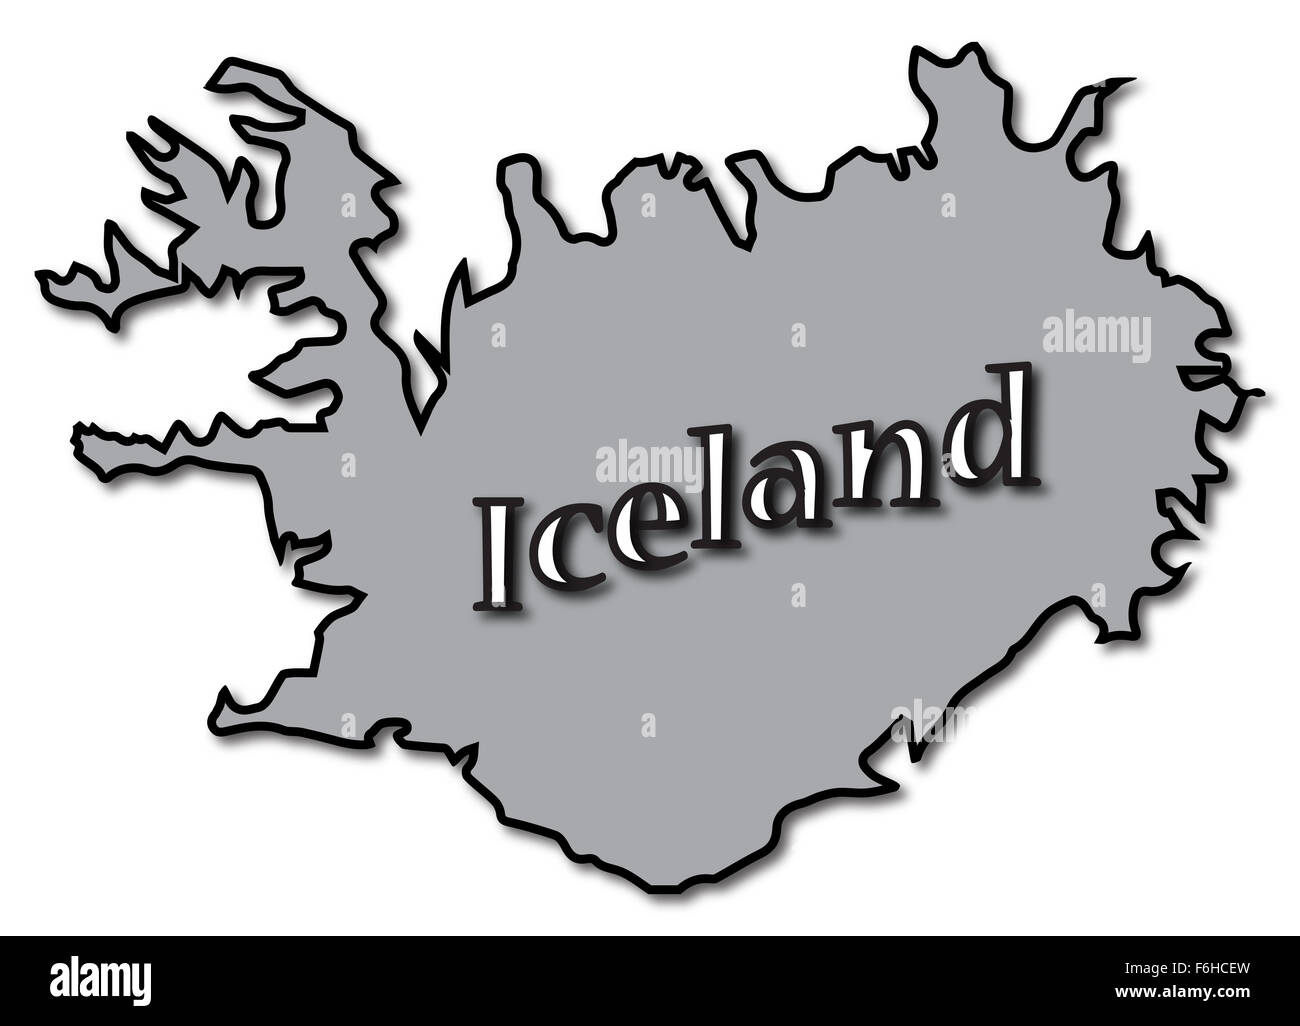 An Iceland map with text and a shadow isolated on a white background Stock Photo